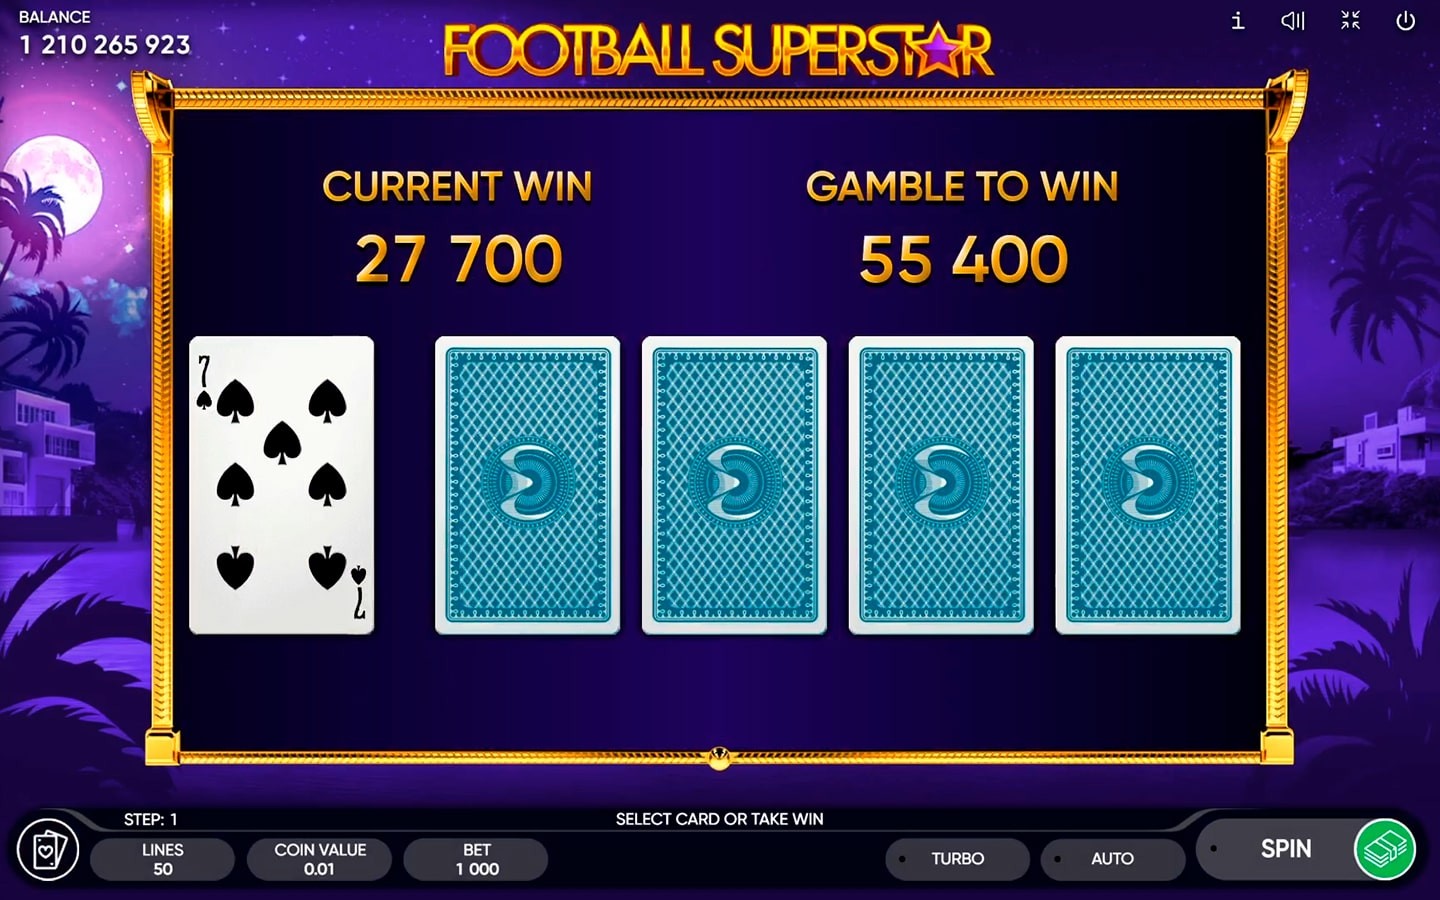 BEST FOOTBALL SLOTS OF 2020 | Try FOOTBALL SUPERSTAR GAME by Endorphina